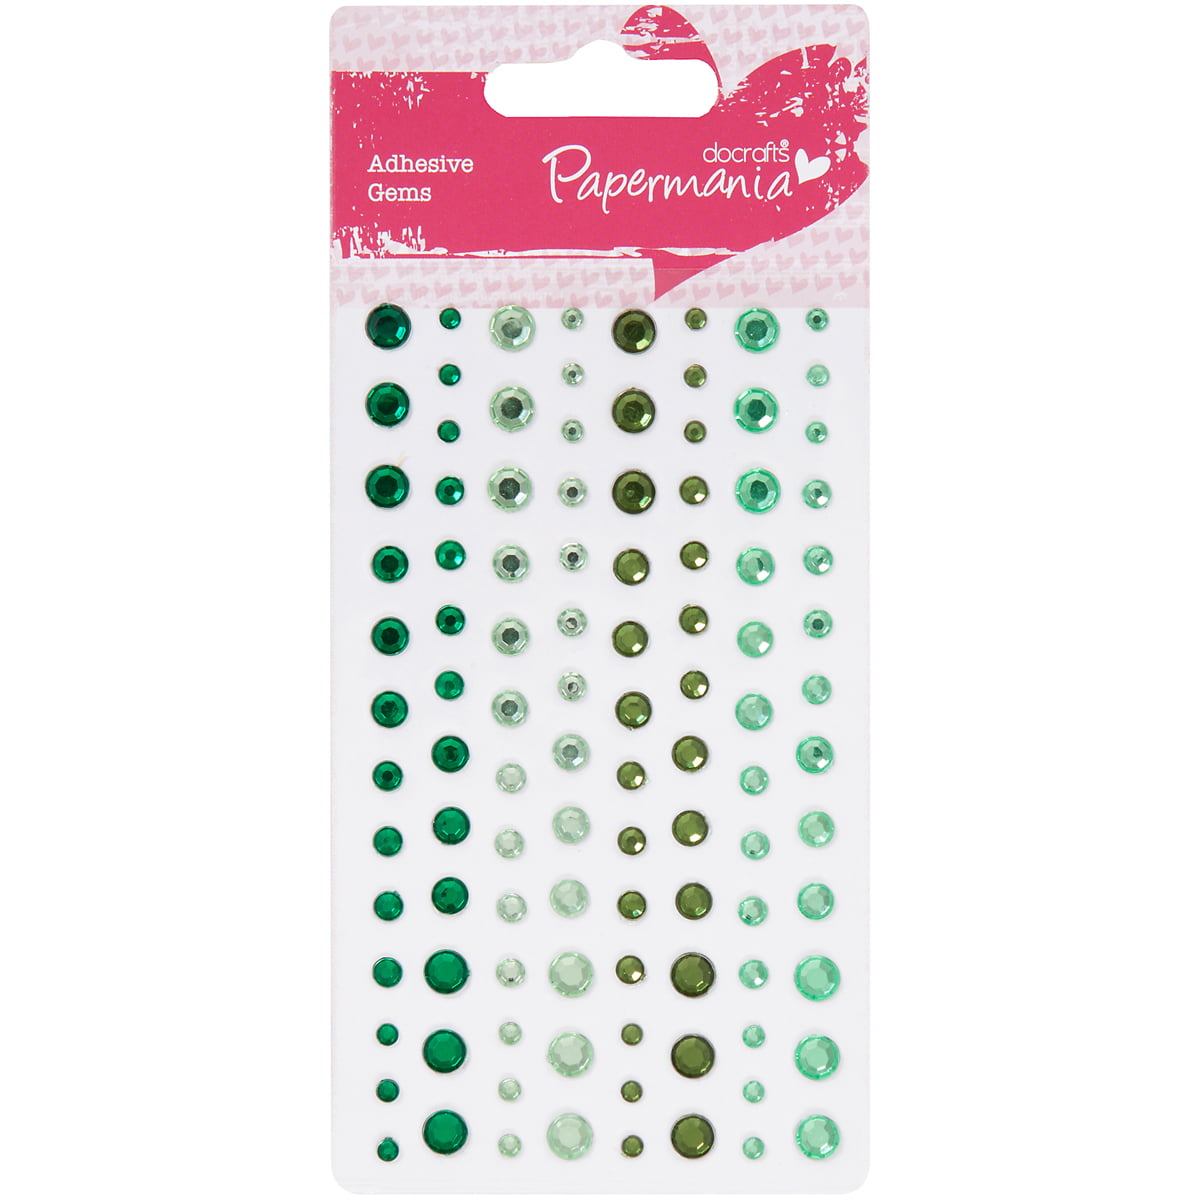 Papermania Capsule Collection Adhesive Gems REDUCED TO CLEAR! 